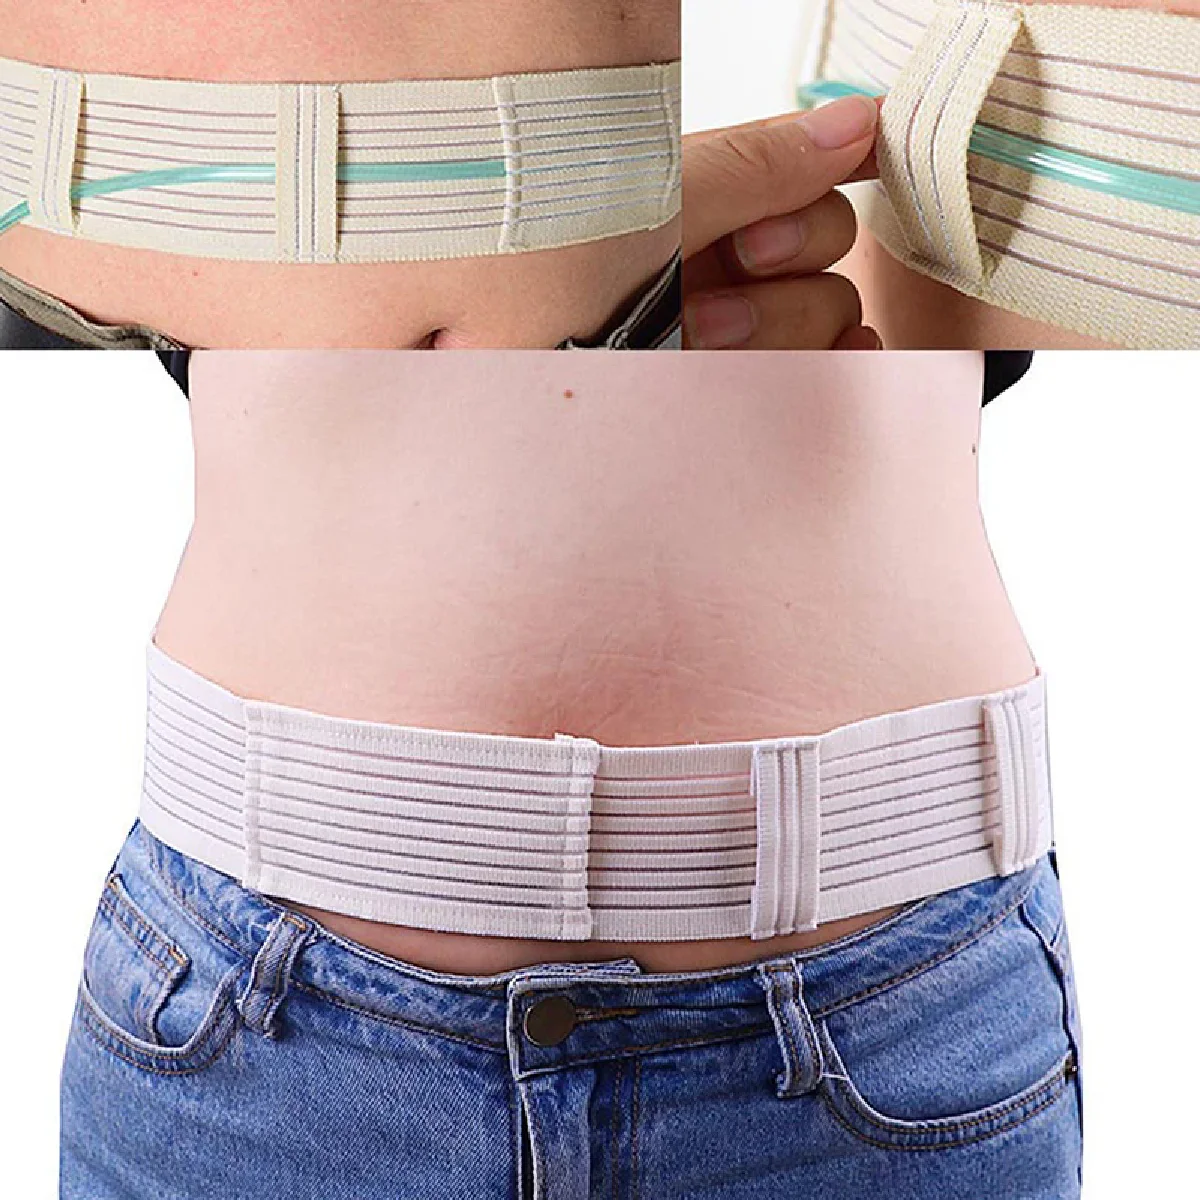 

Kidney Belt Dialysis Conduit Protection Belt Adjustable Breathable Abdominal Peritoneal Therapy Back Support